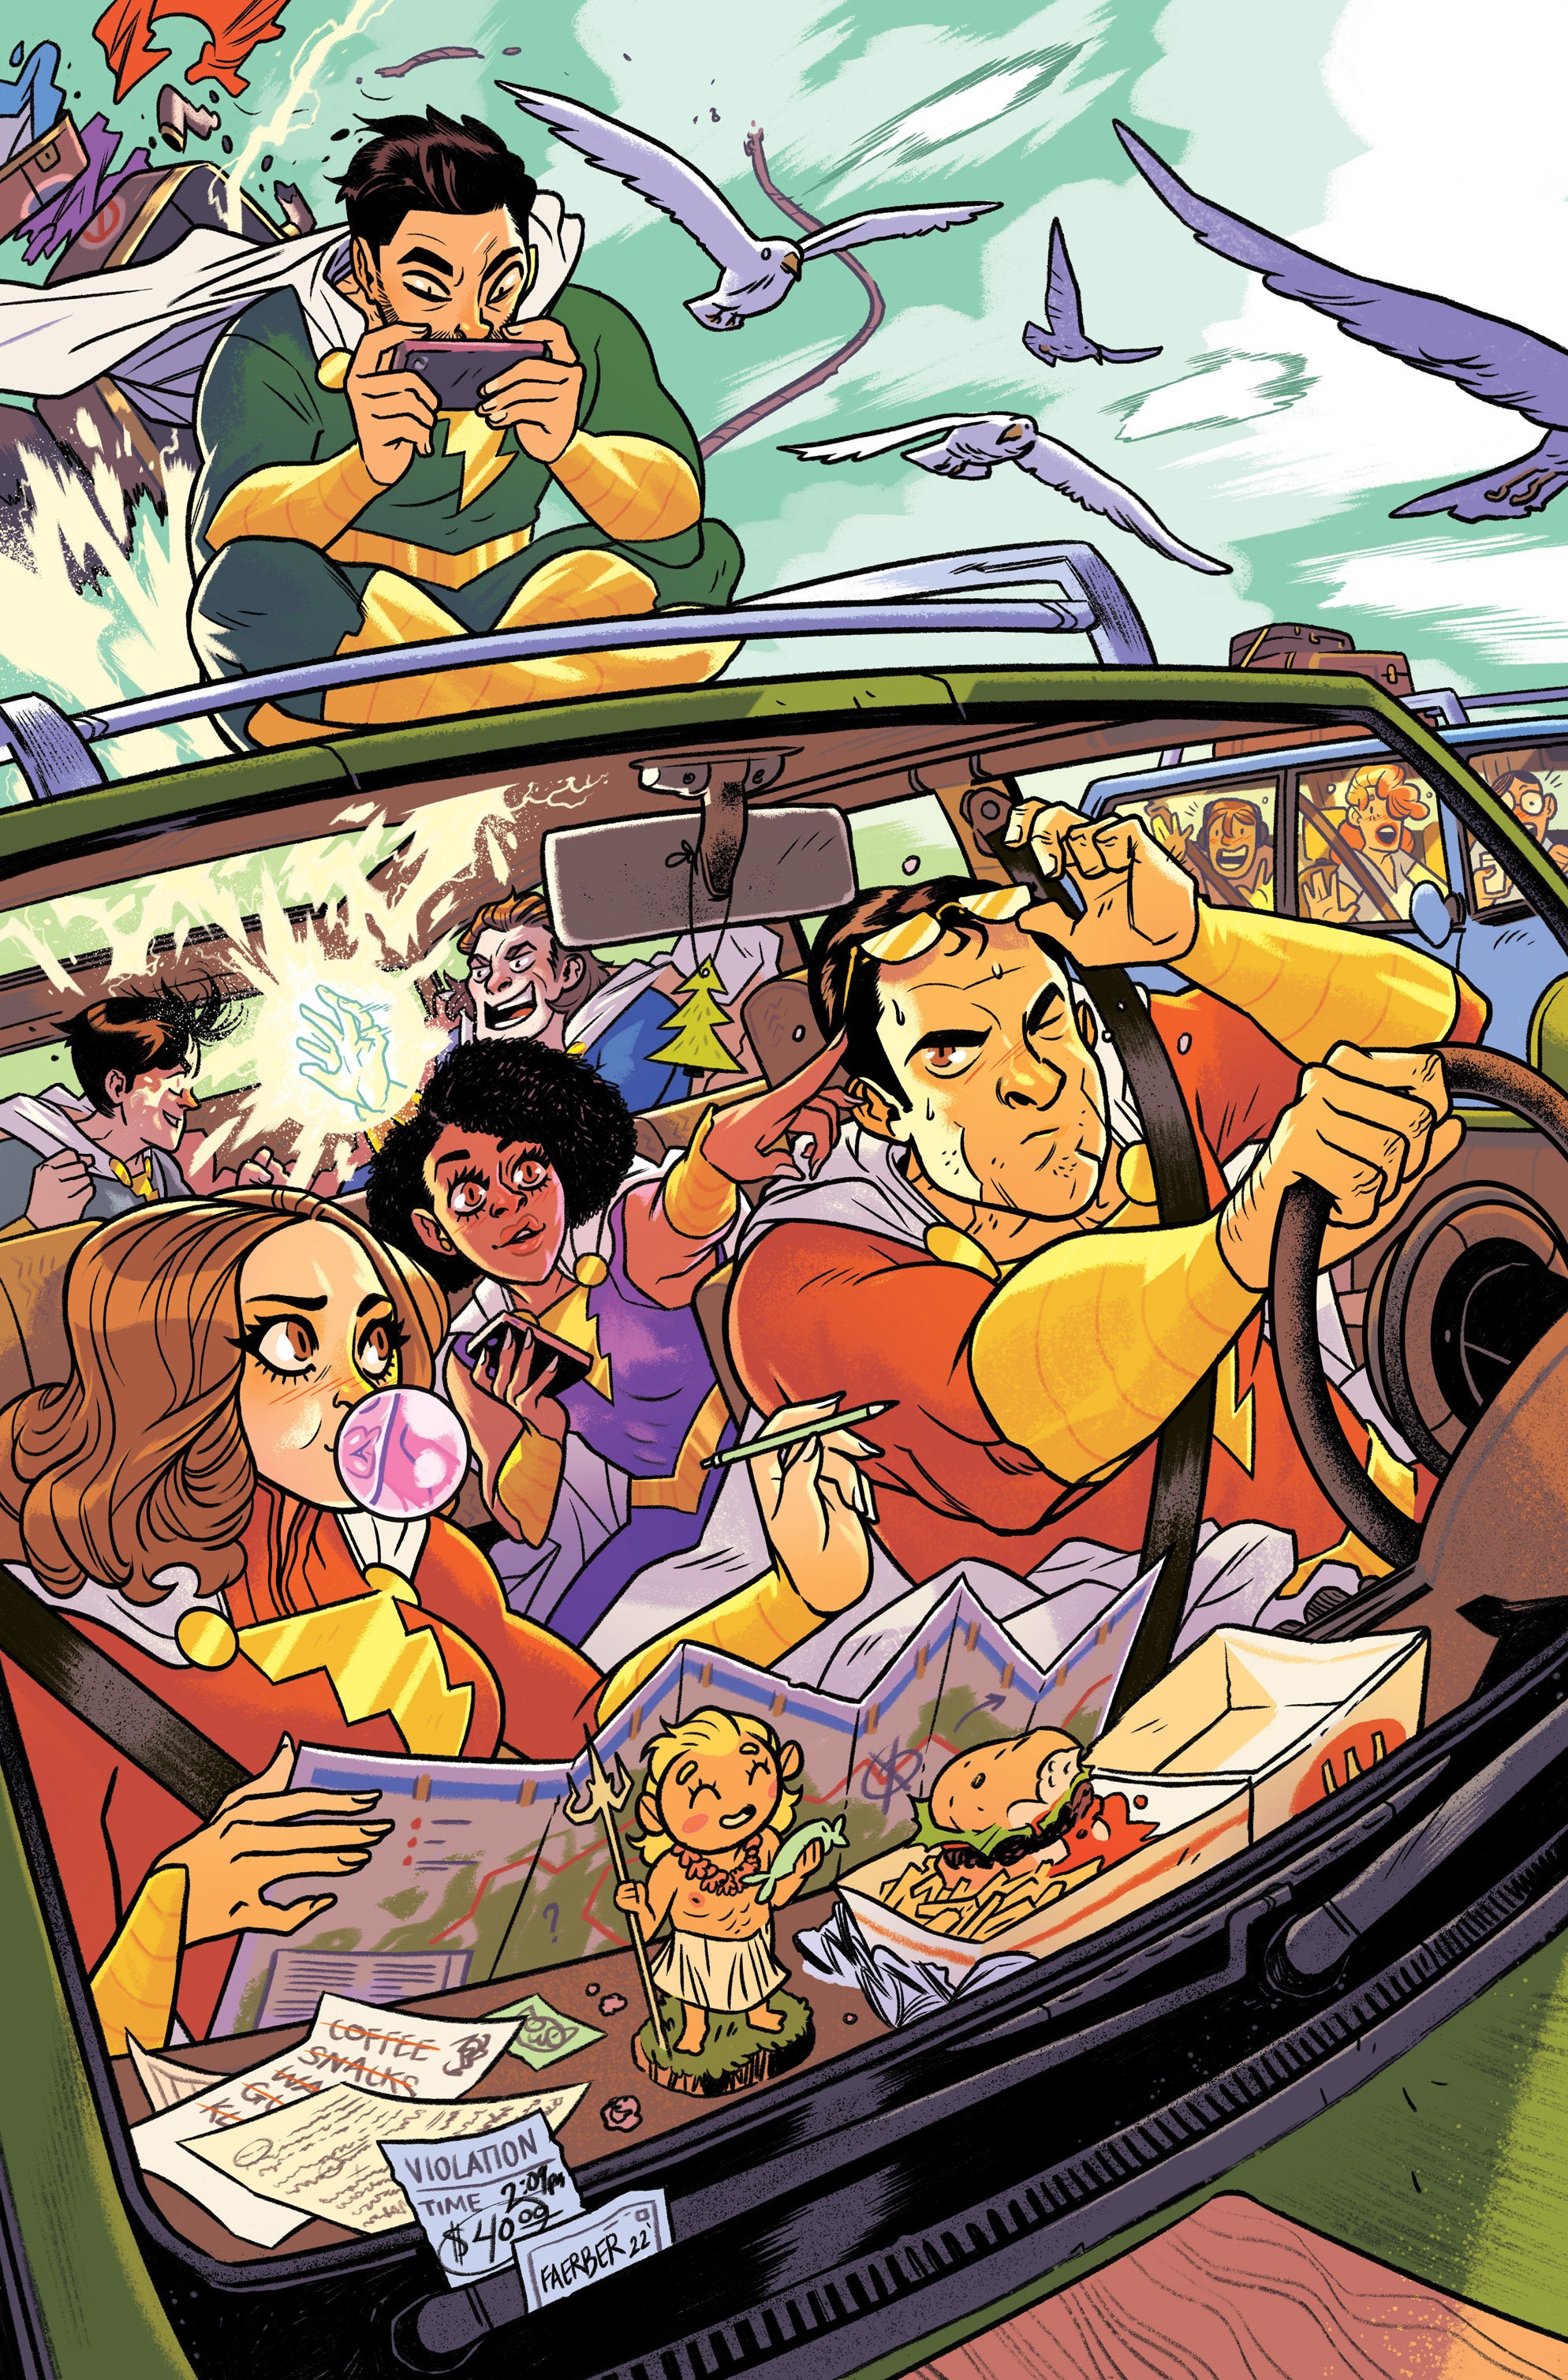 Variant Cover of Shazamily on a roadtrip, in a car, while Mary is reading a map